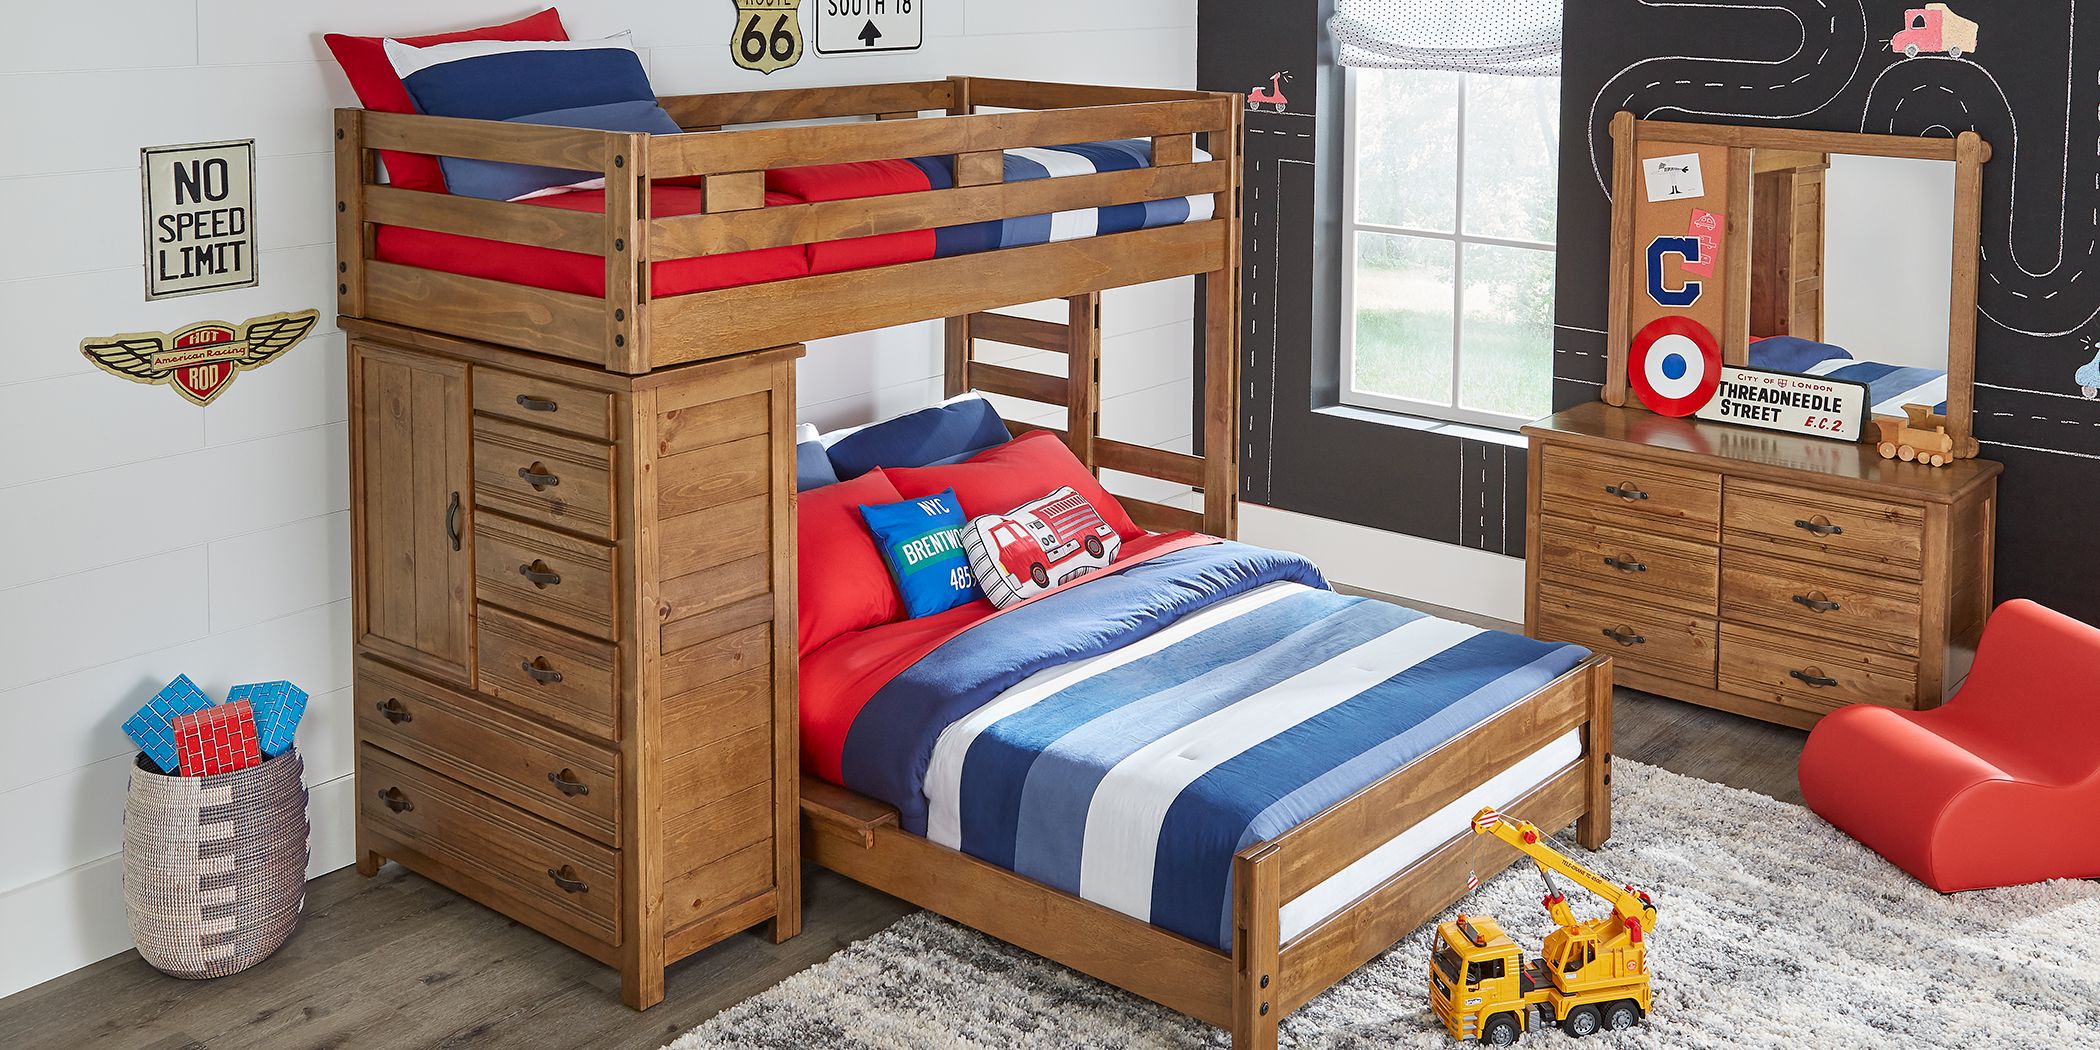 L Shaped Bunk Beds Corner, L Shaped Bunk Beds Twin Over Full